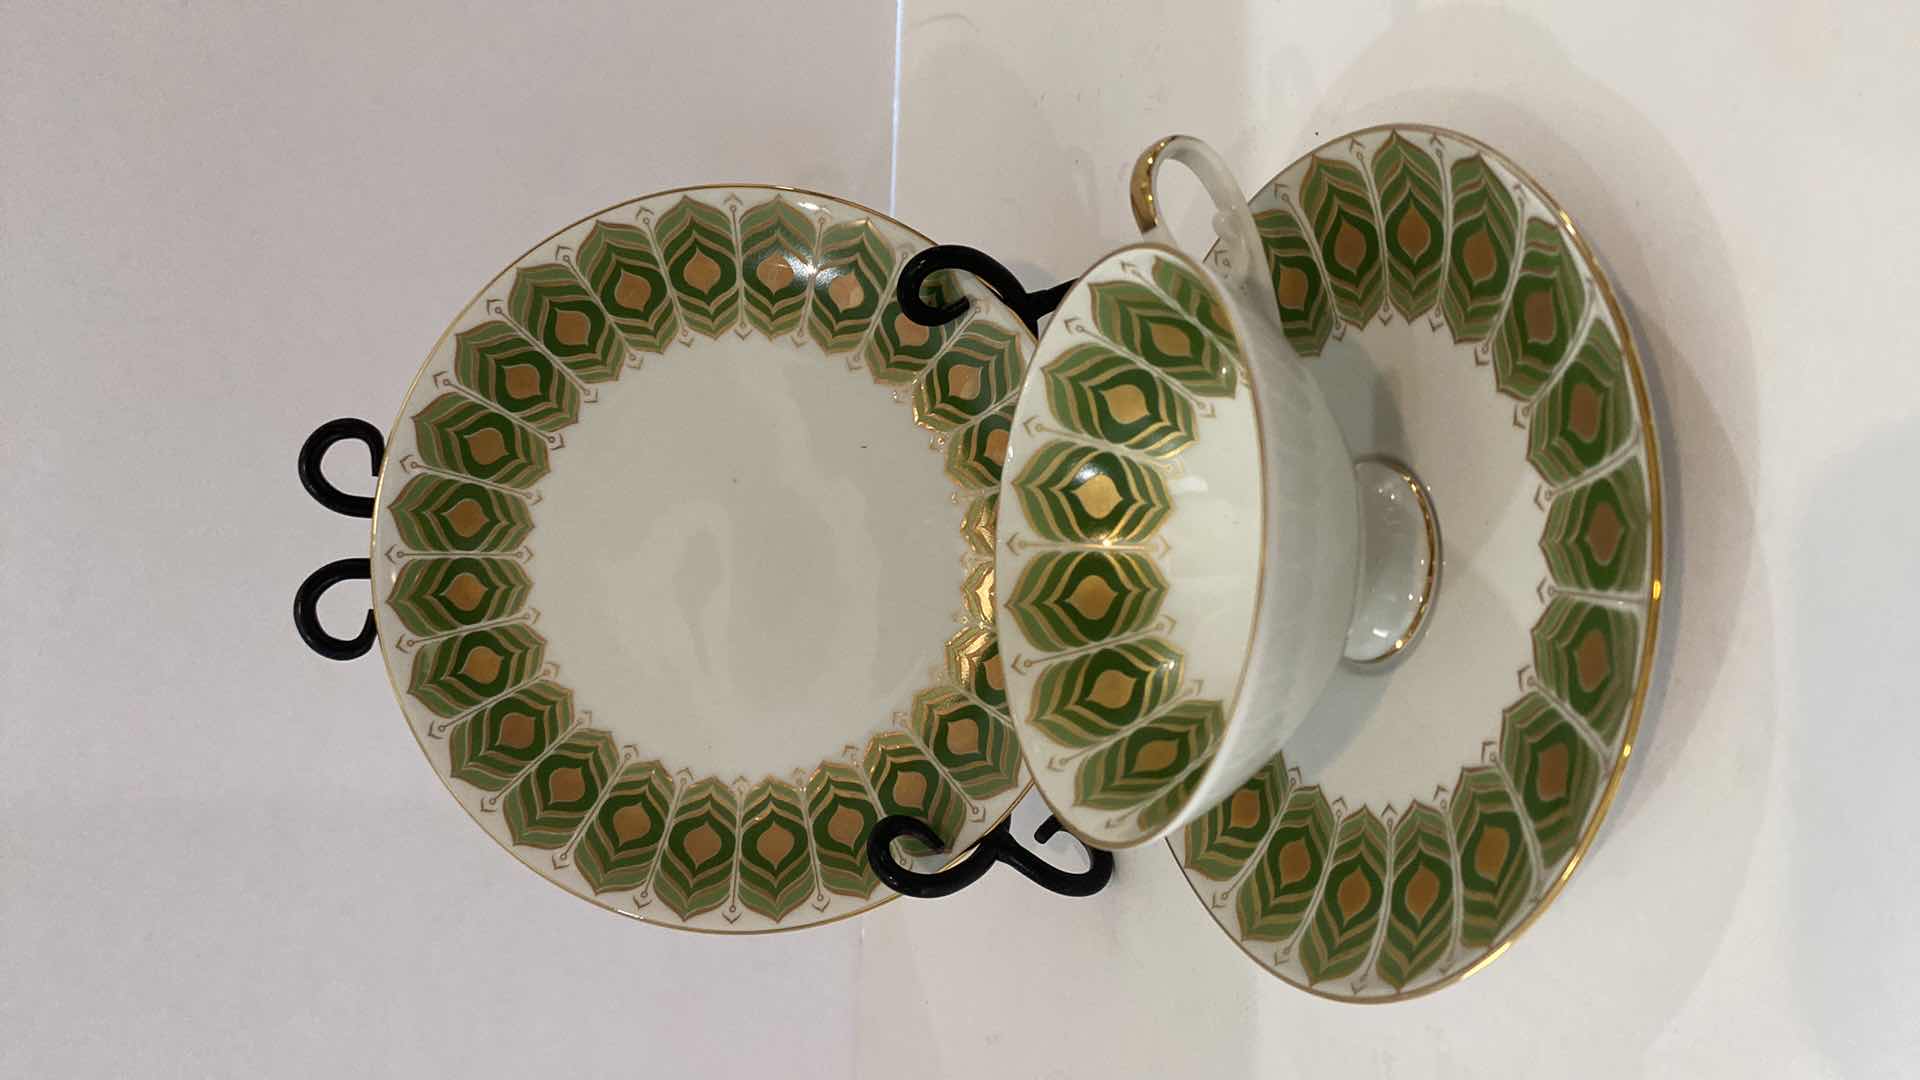 Photo 1 of ALBOTH & KAISER BAVARIA 3 PIECE TEA CUP, SAUCER AND PLATE SET WITH GOLD EDGE